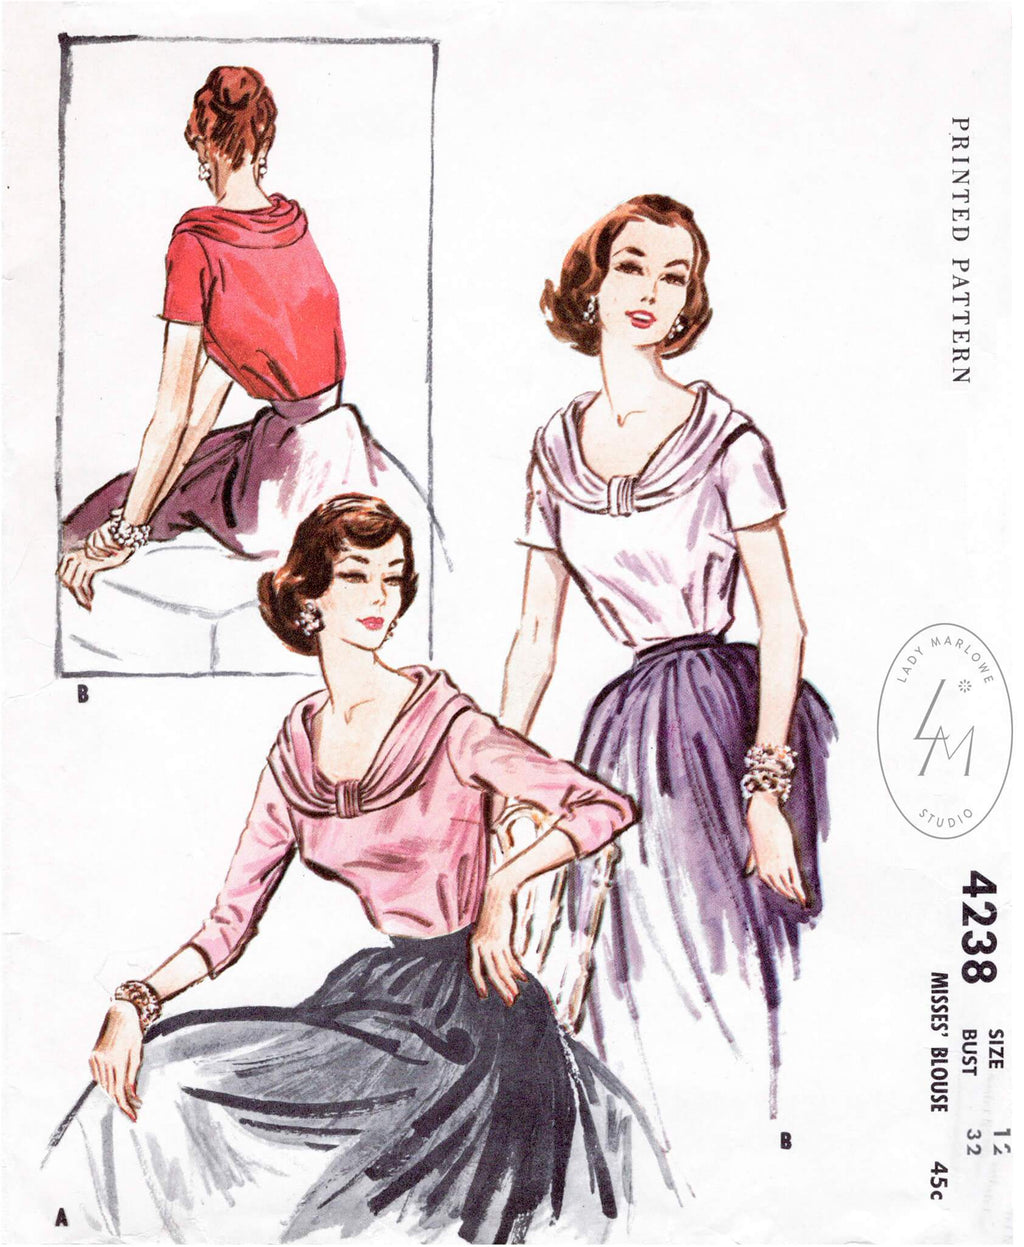 McCall 4238 1950s blouse sewing pattern 1950